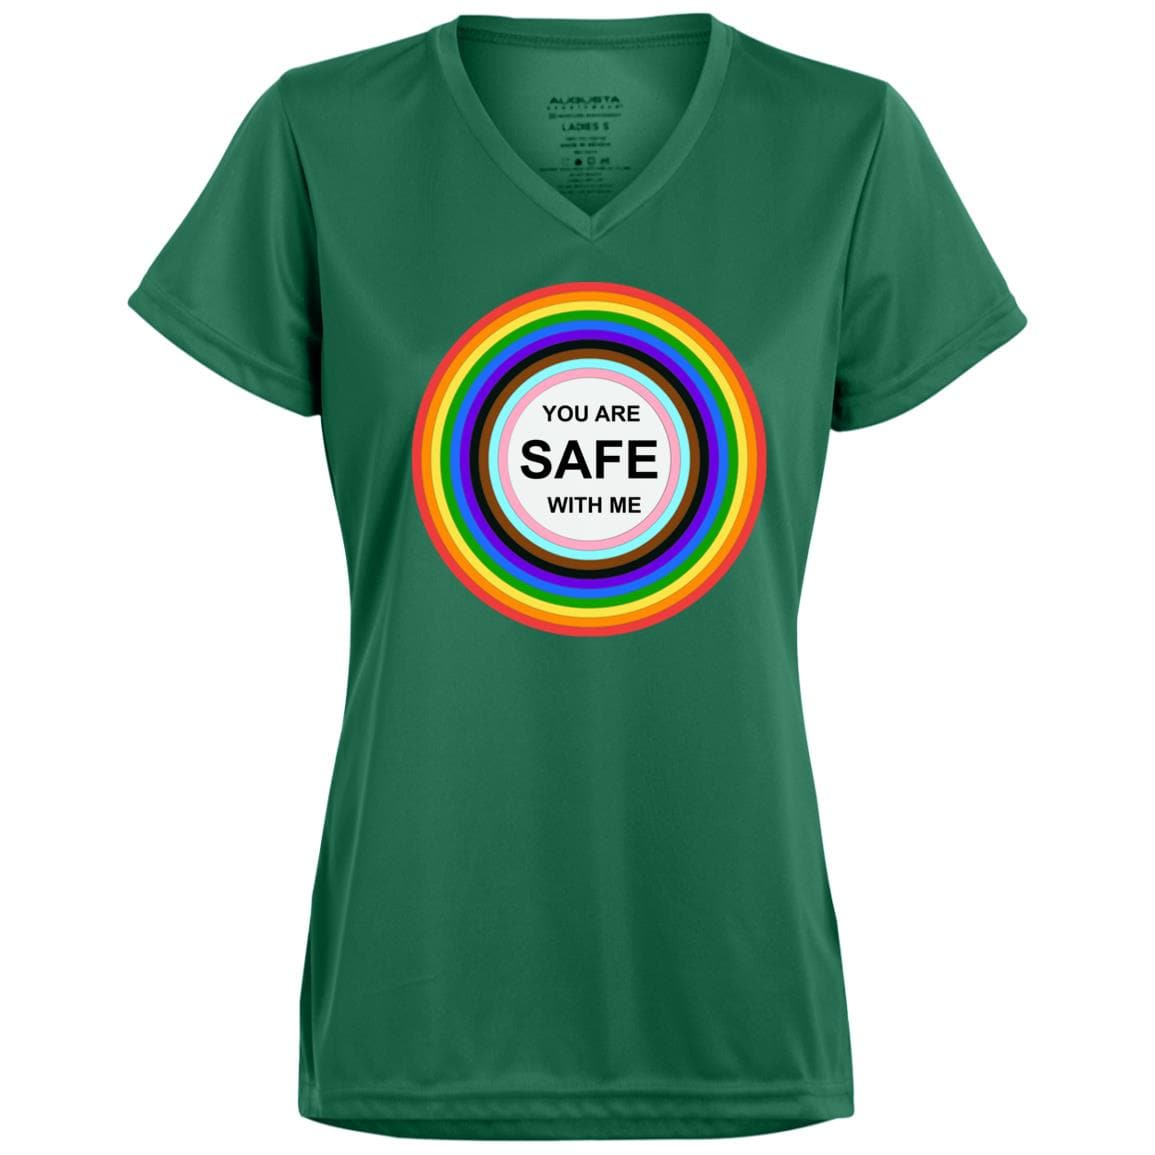 You are safe with me - T shirt & Hoodie - PrideBooth